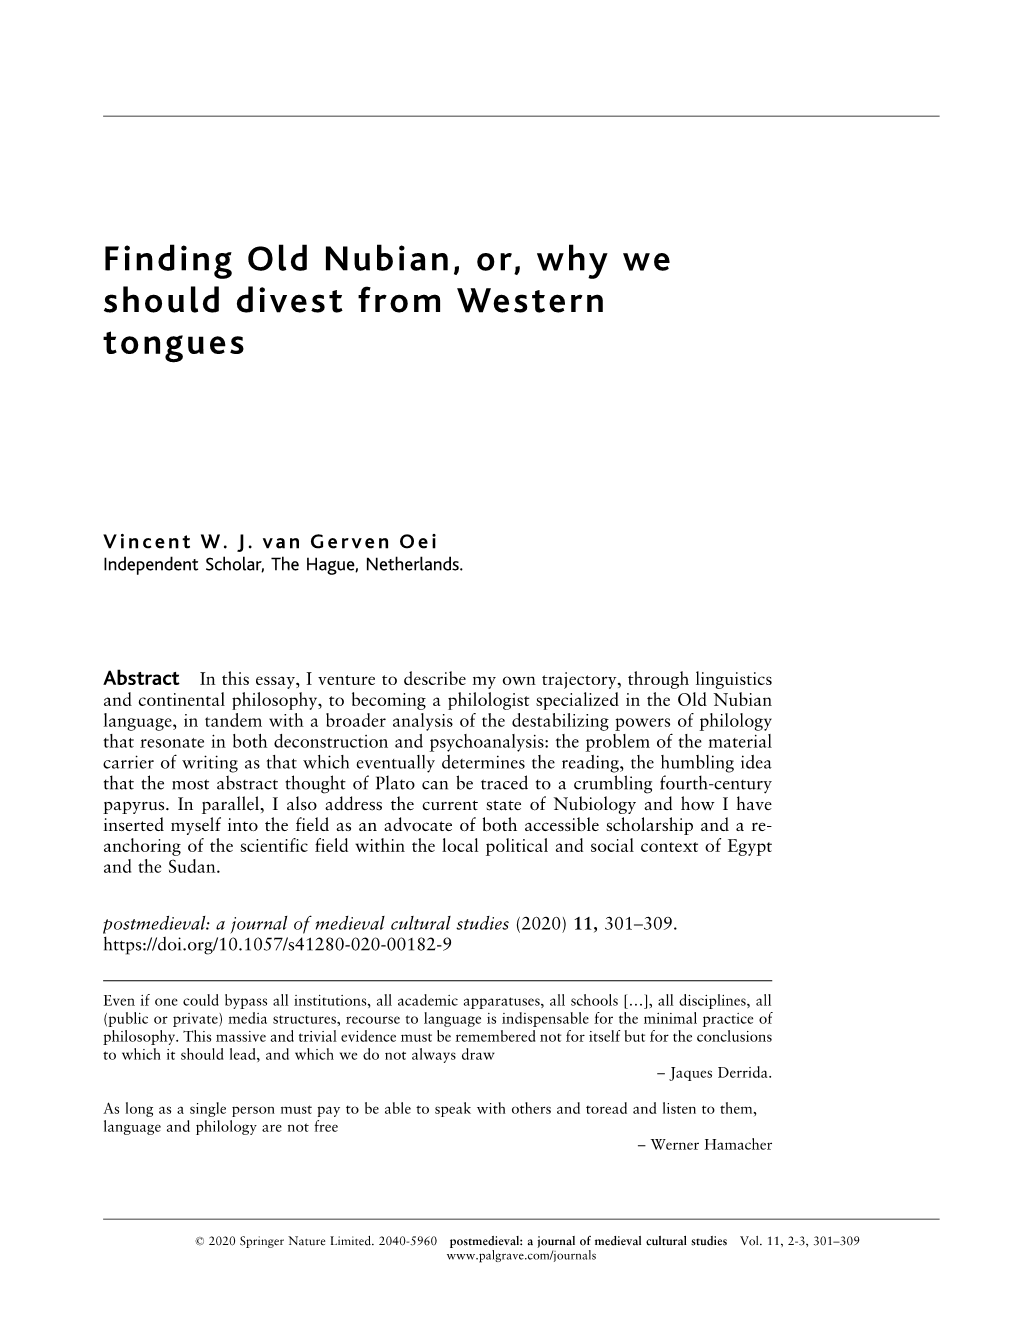 Finding Old Nubian, Or, Why We Should Divest from Western Tongues